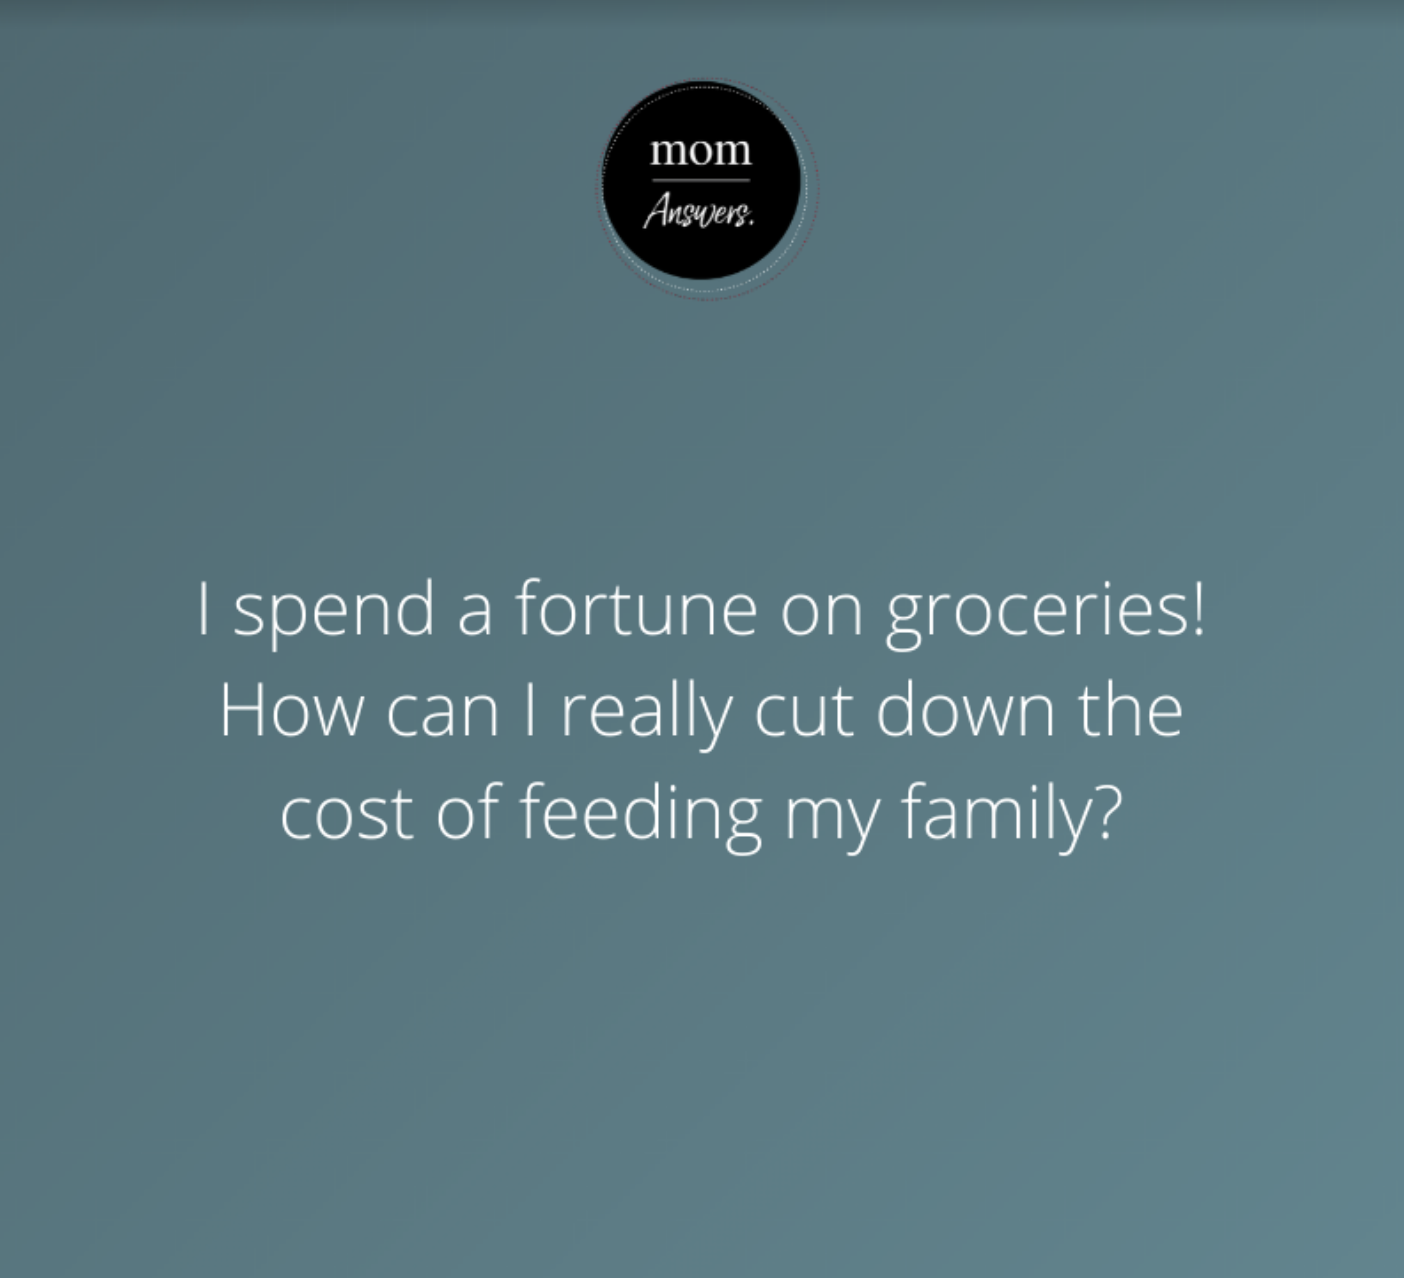 uno home loans mom answers how to save on groceries